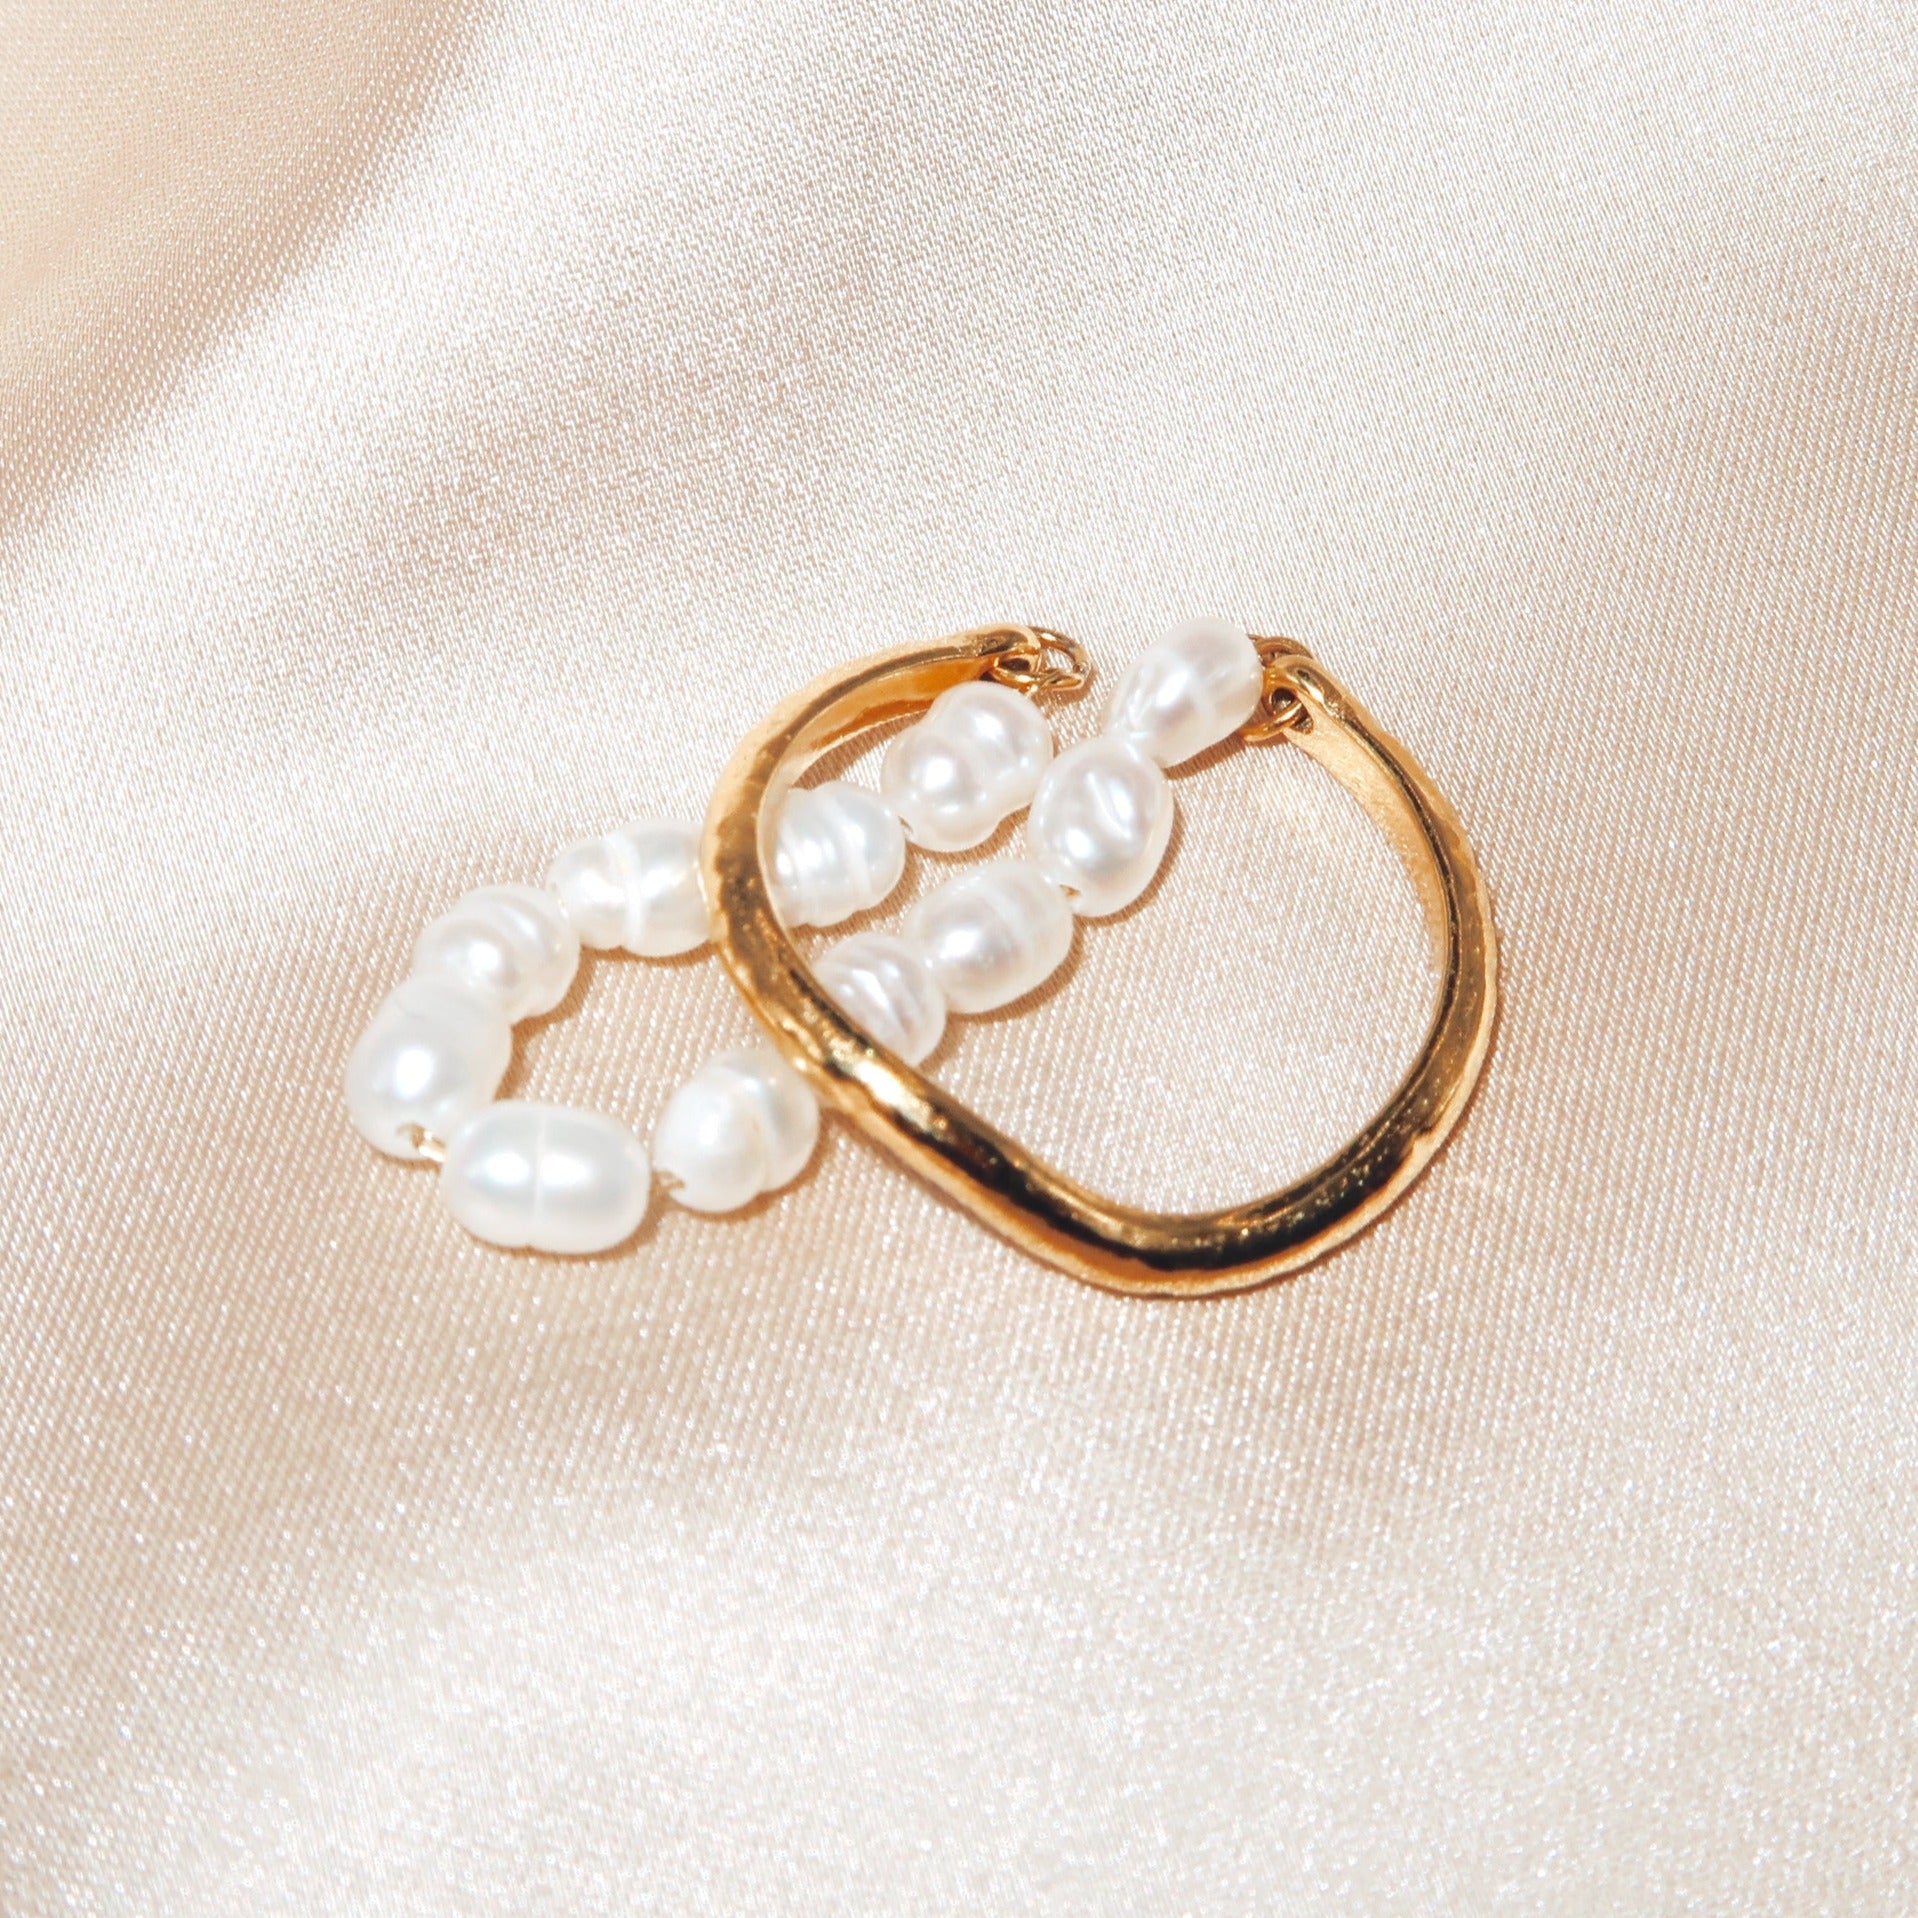 KAIA - 18K PVD Gold Plated Double Hoop Ring with Freshwater Pearls - Mixed Metals